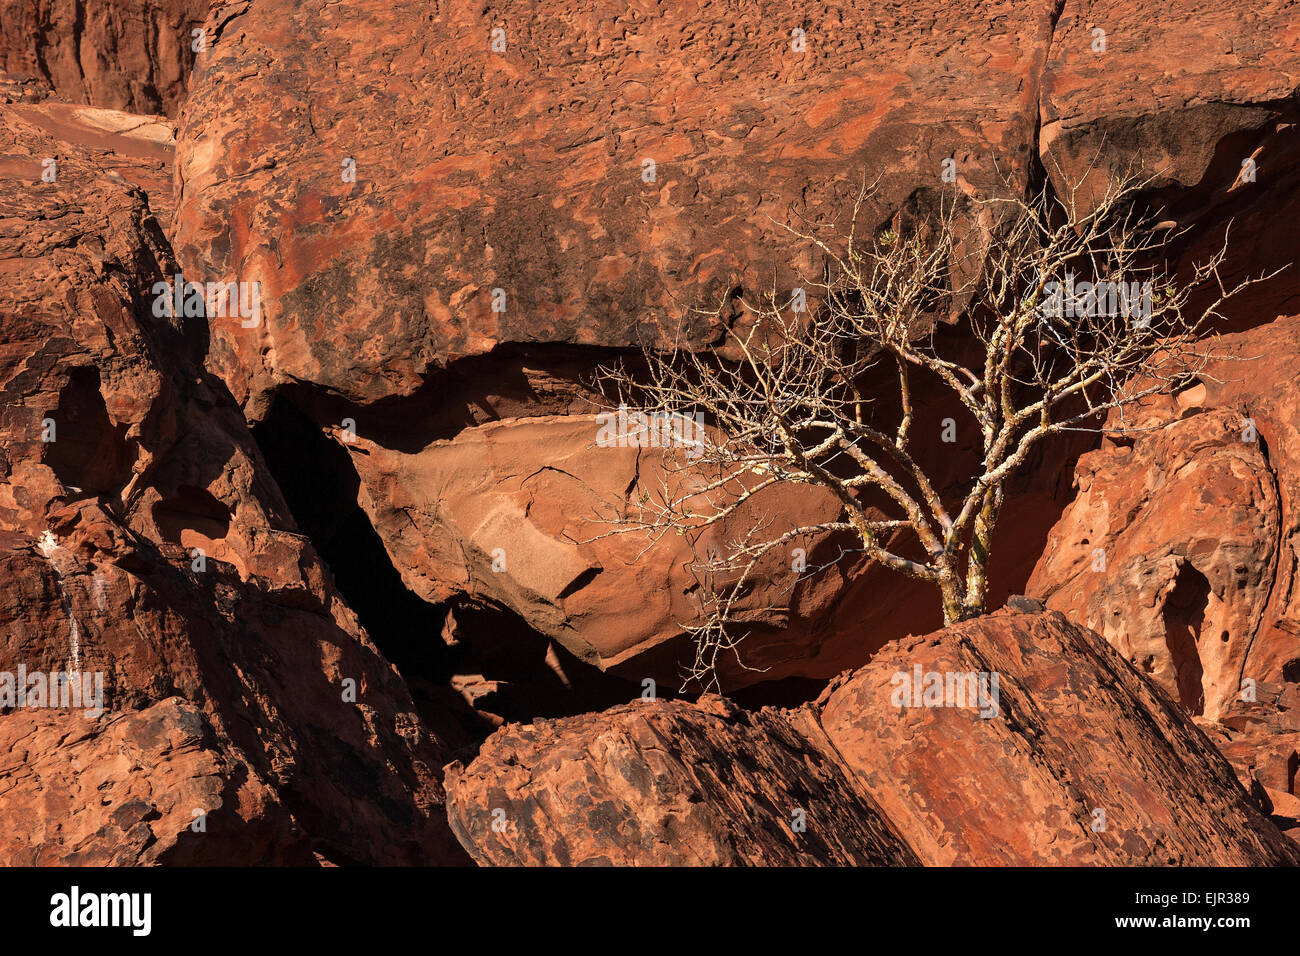 Balsam tree (glaucescens Commiphora) tra rocce, Twyfelfontein, Namibia Foto Stock